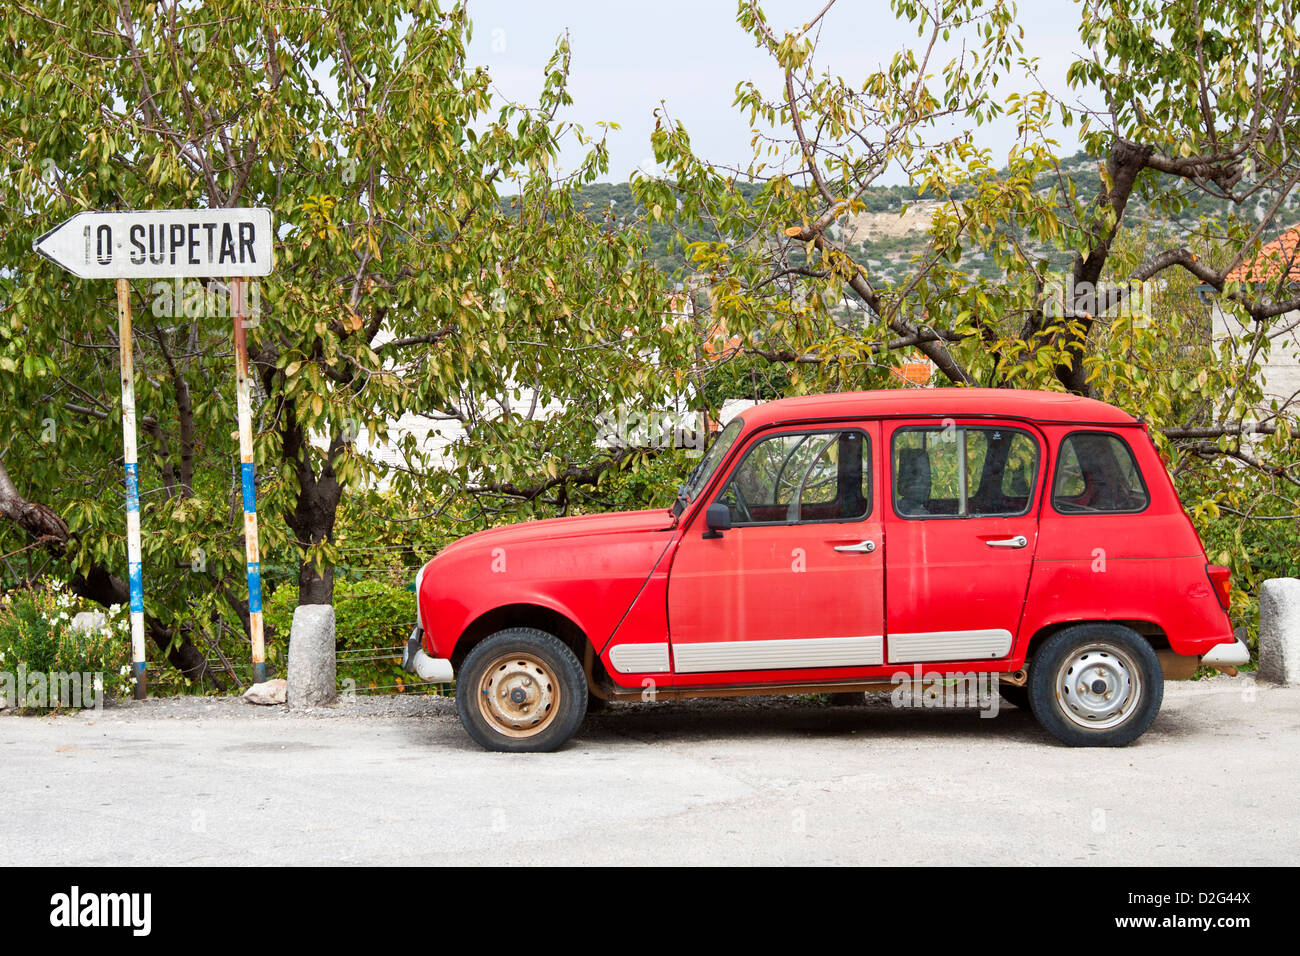 An old red Renault car parked on the side of the road, next to a sign pointing to the direction of Supetar on the island of Brac Stock Photo